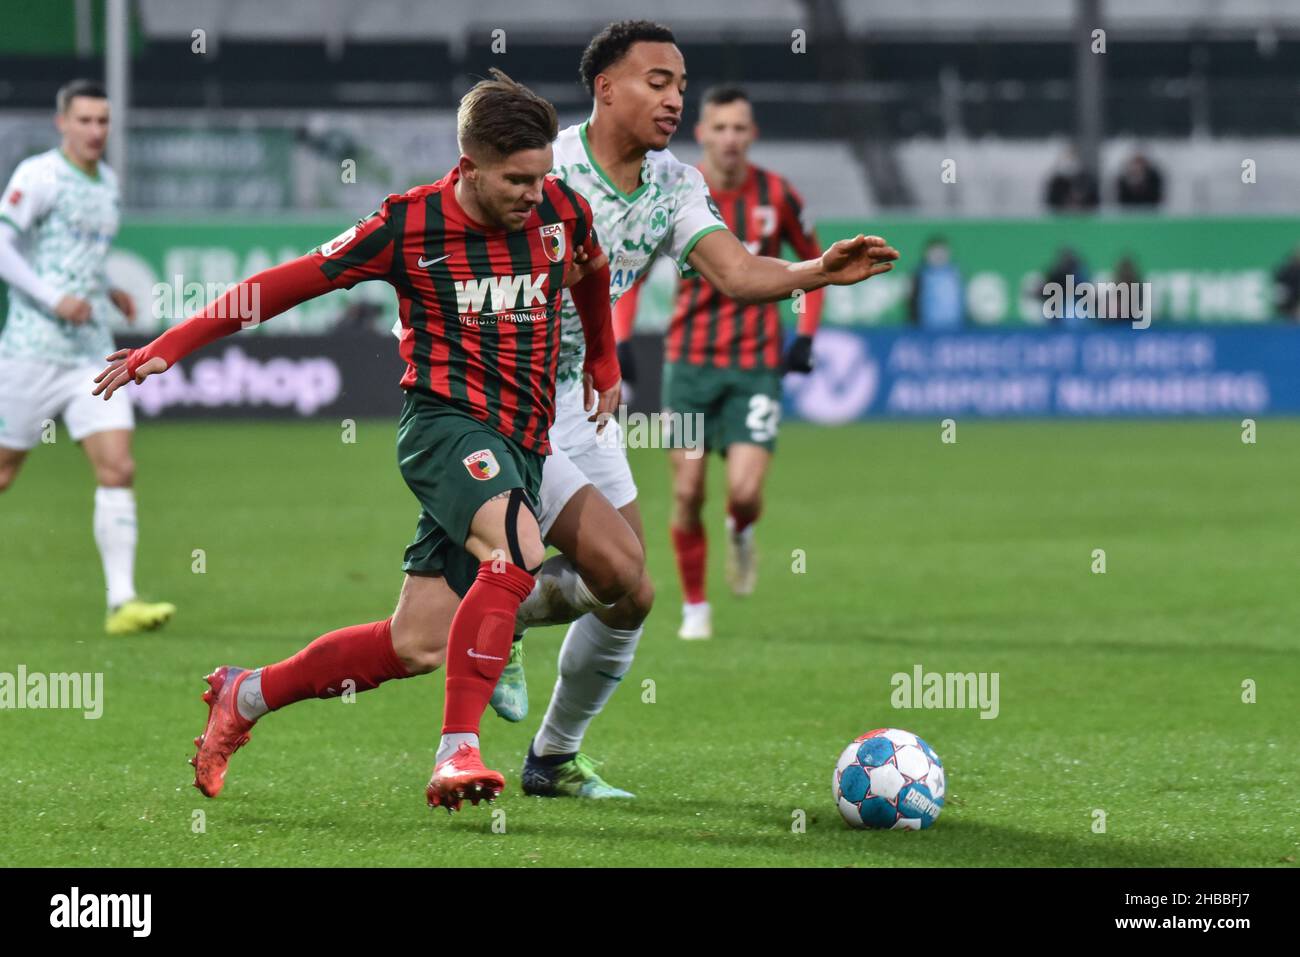 Fuerth, Germany. 18th Dec, 2021.  Fussball, 1.Bundesliga - SpVgg Greuther Fuerth vs. FC Augsburg  Image: (fLTR) Carlos Gruezo (FC Augsburg, 8), Jamie Leweling (SpVgg Greuther Fürth,40)  DFL regulations prohibit any use of photographs as image sequences and or quasi-video Credit: Ryan Evans/Alamy Live News Stock Photo